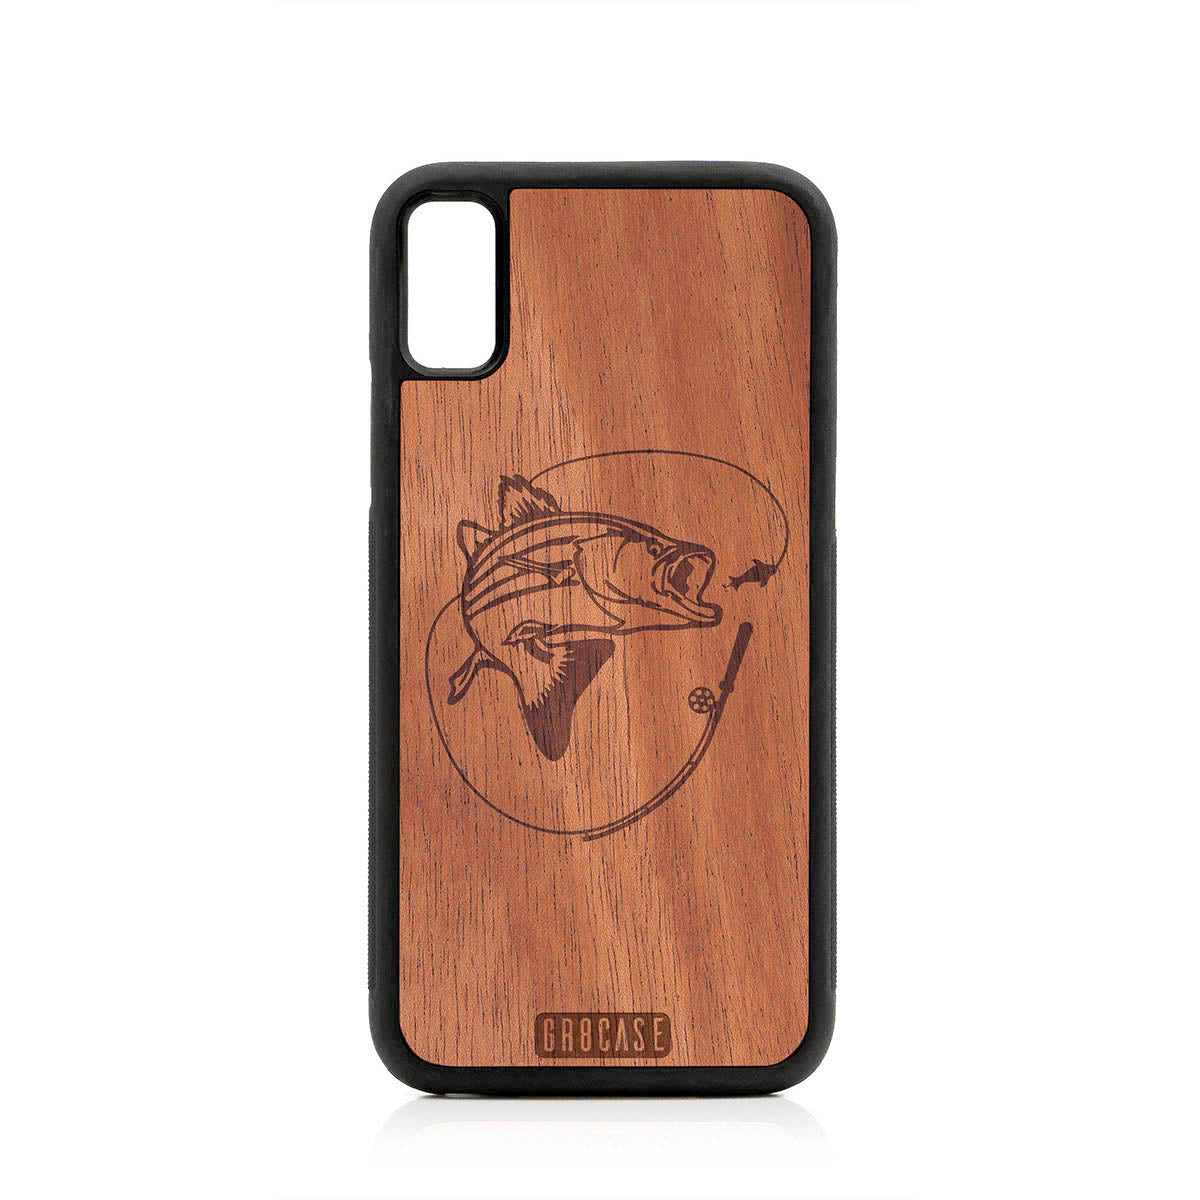 iPhone XS Max Wood Case Fish and Reel Design